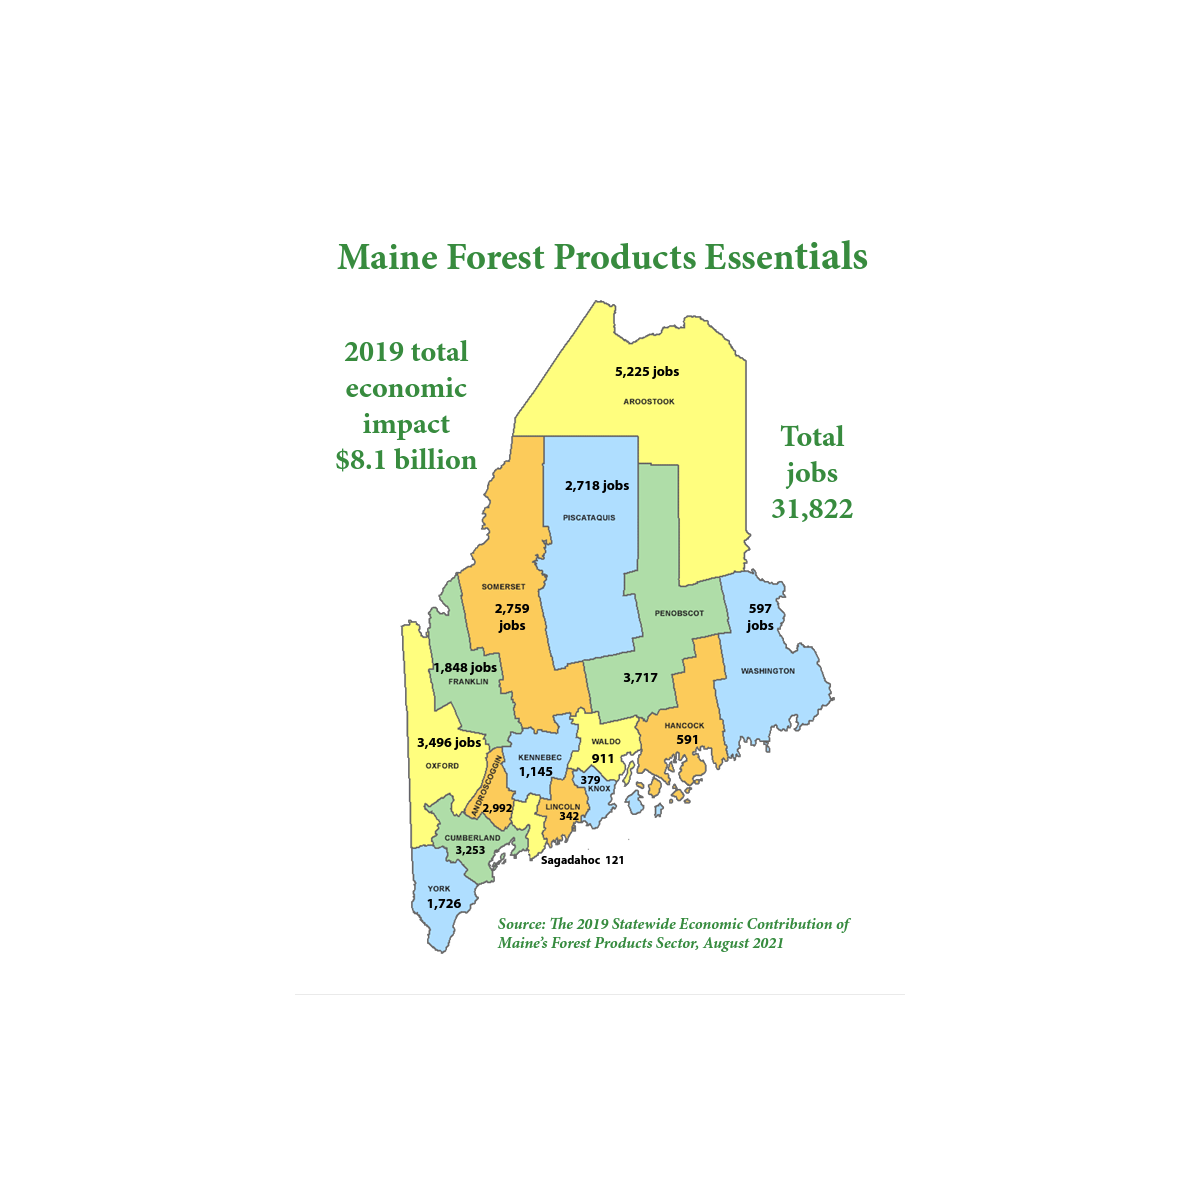 Maine Forest Products Essentials